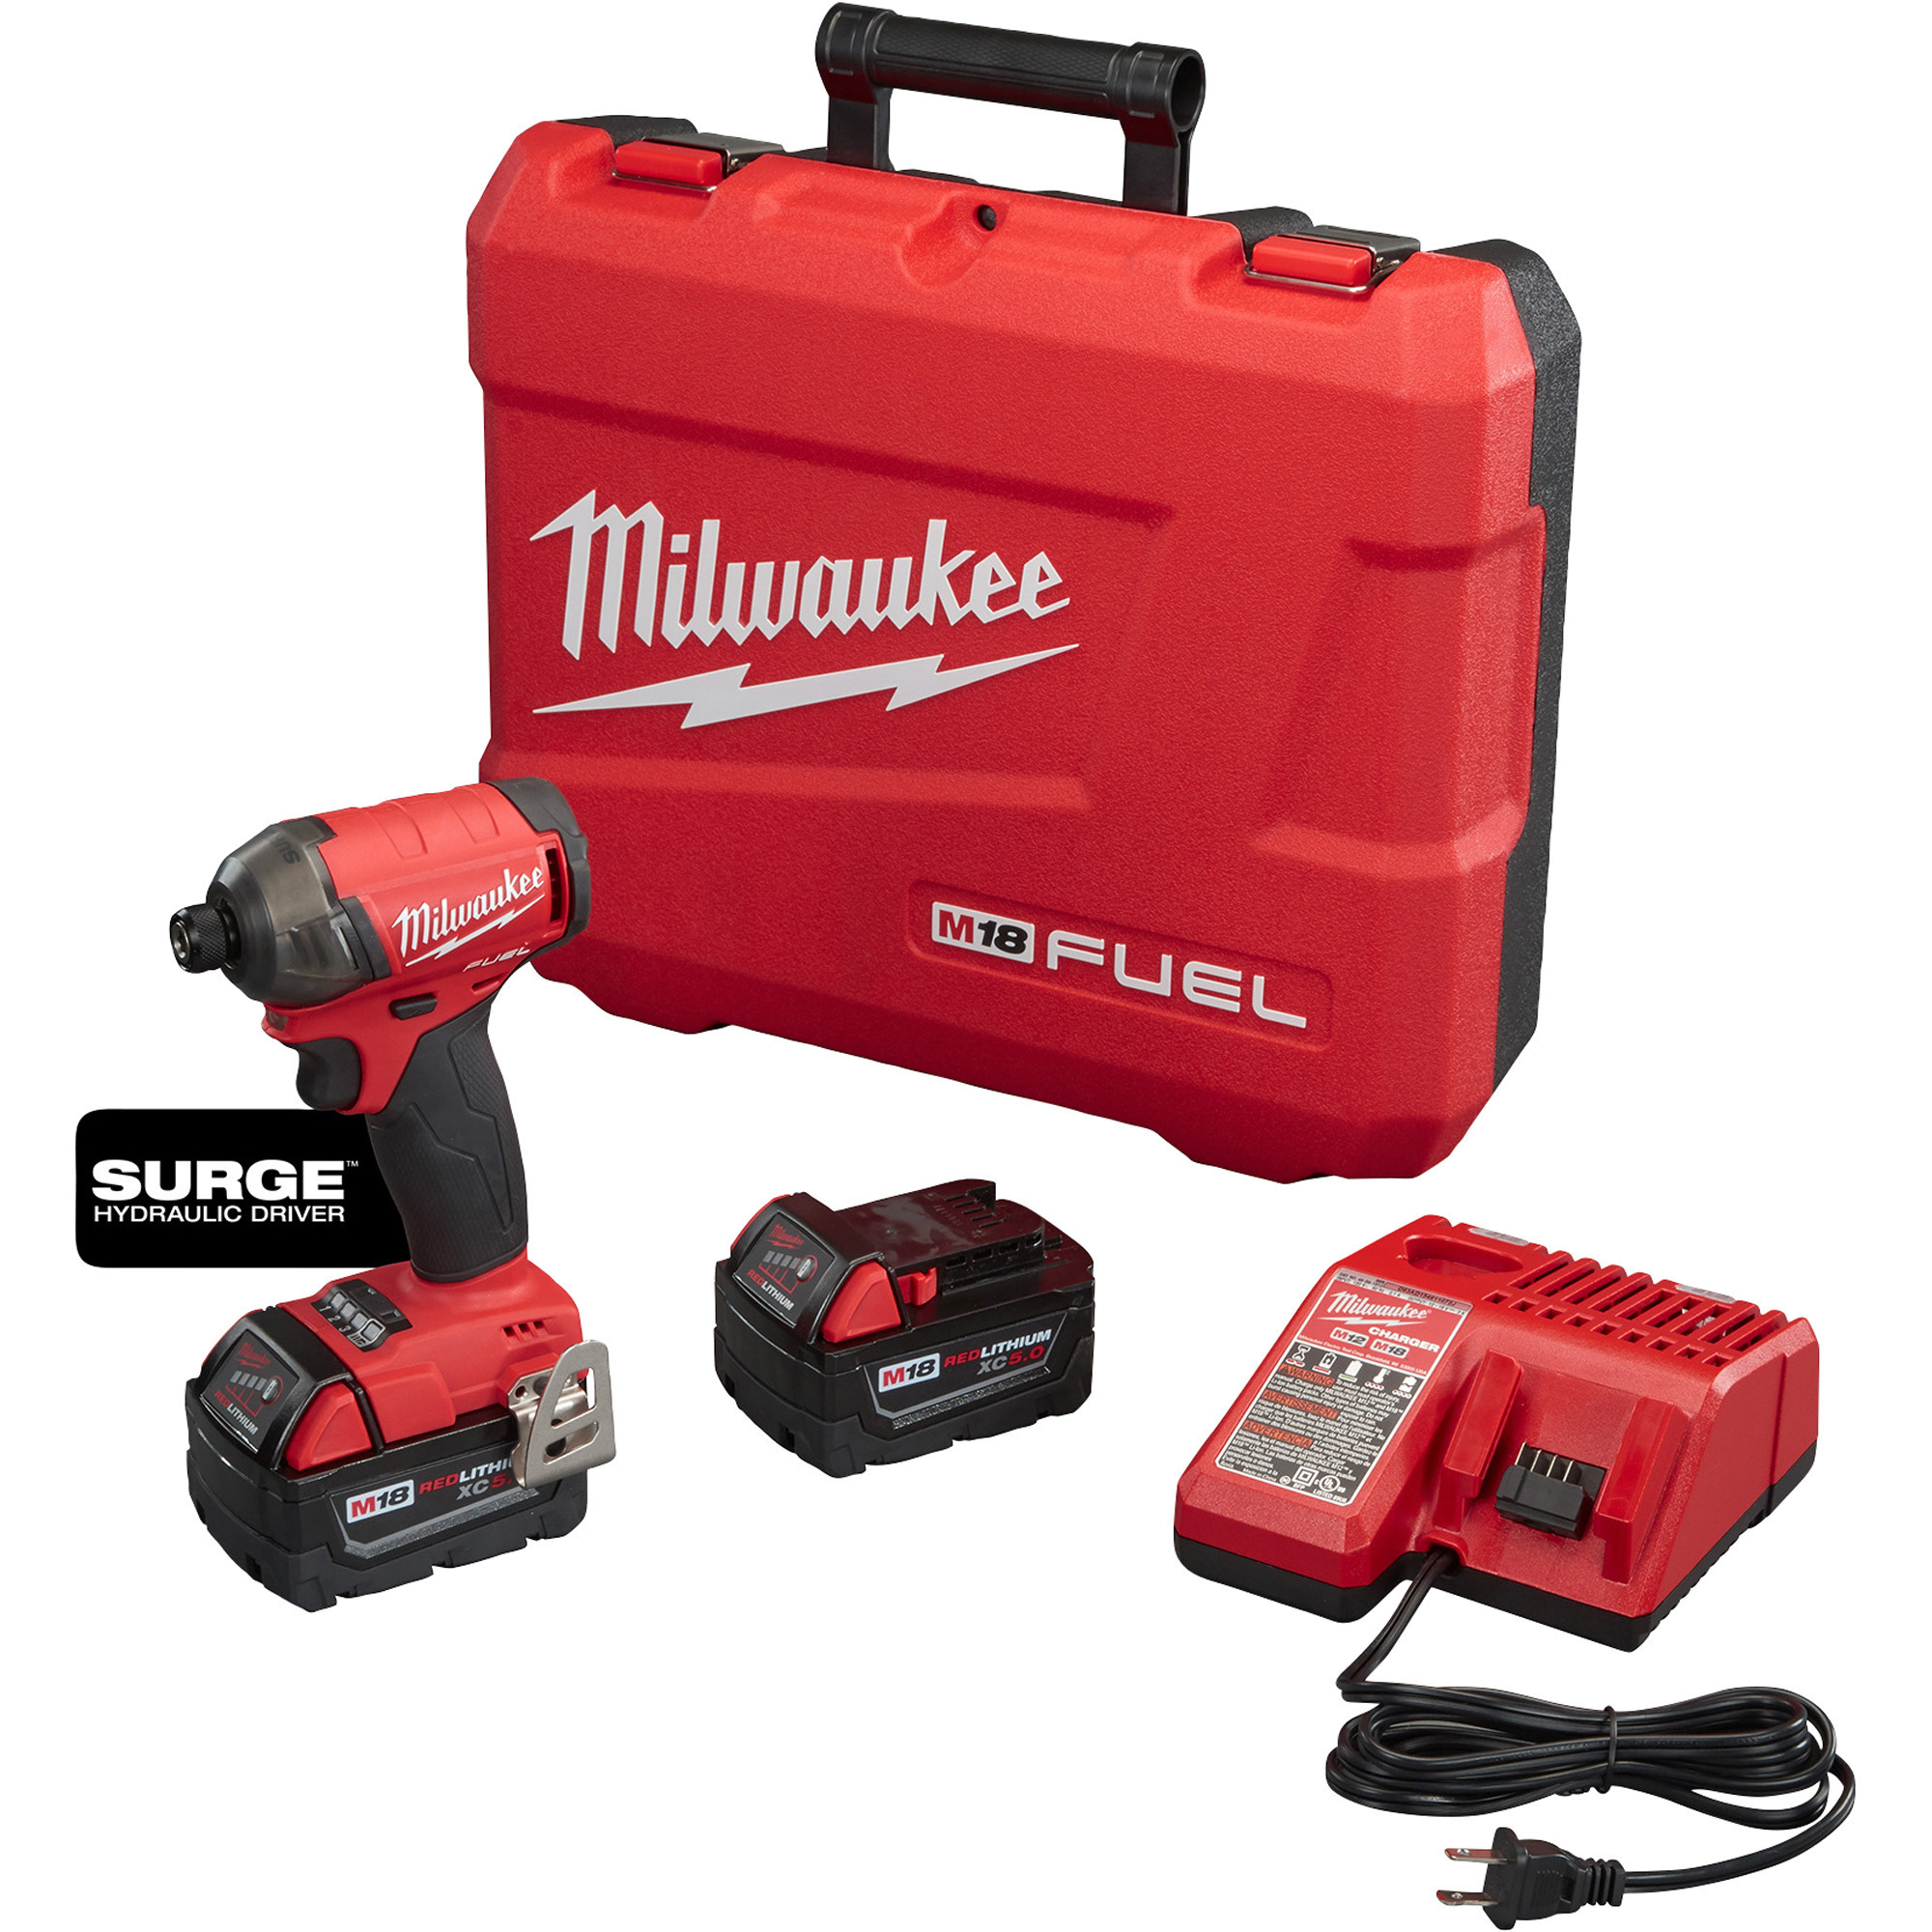 Milwaukee M18 FUEL Surge Cordless Hydraulic Impact Driver Kit — 1/4in. Hex  Drive, 37.5 Ft./Lbs. Torque, Batteries, Model# 2760-22 Northern Tool